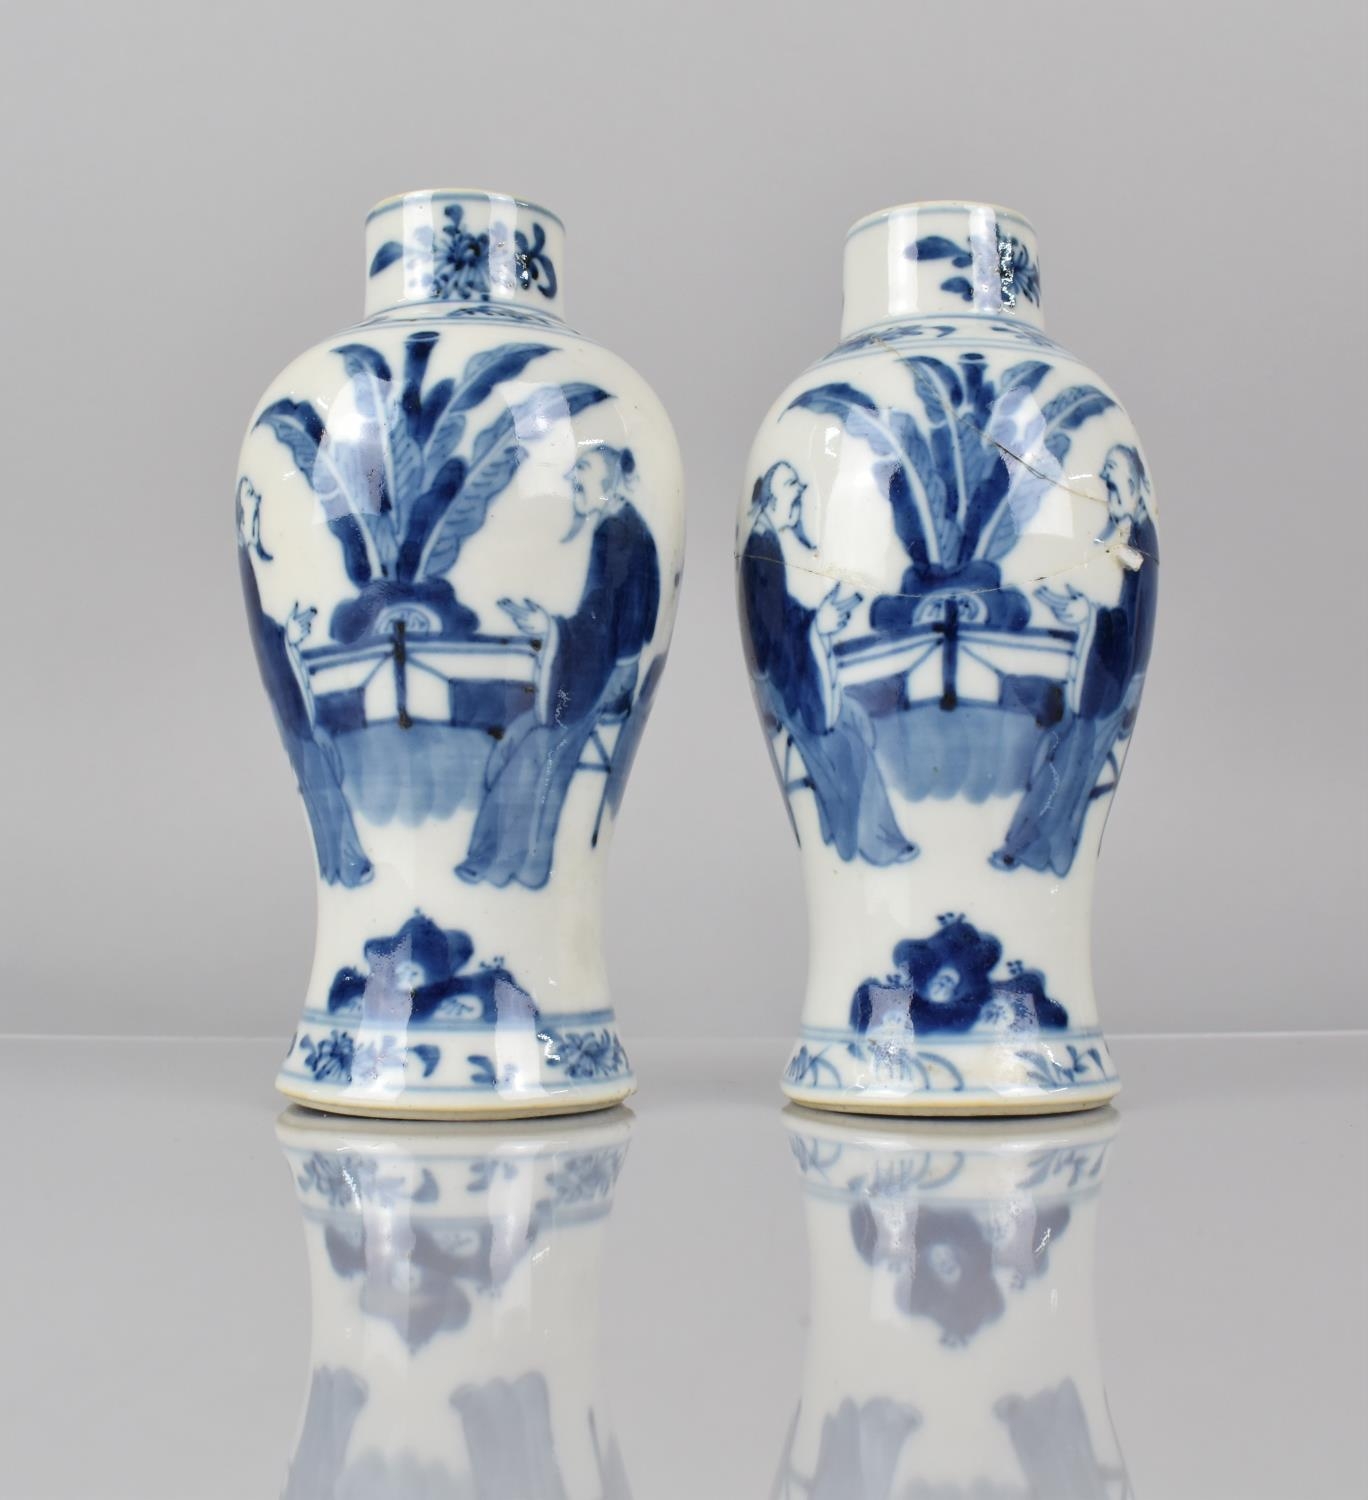 A Pair of 19th Century Chinese Porcelain Blue and White Vases decorated with Scholars in Garden